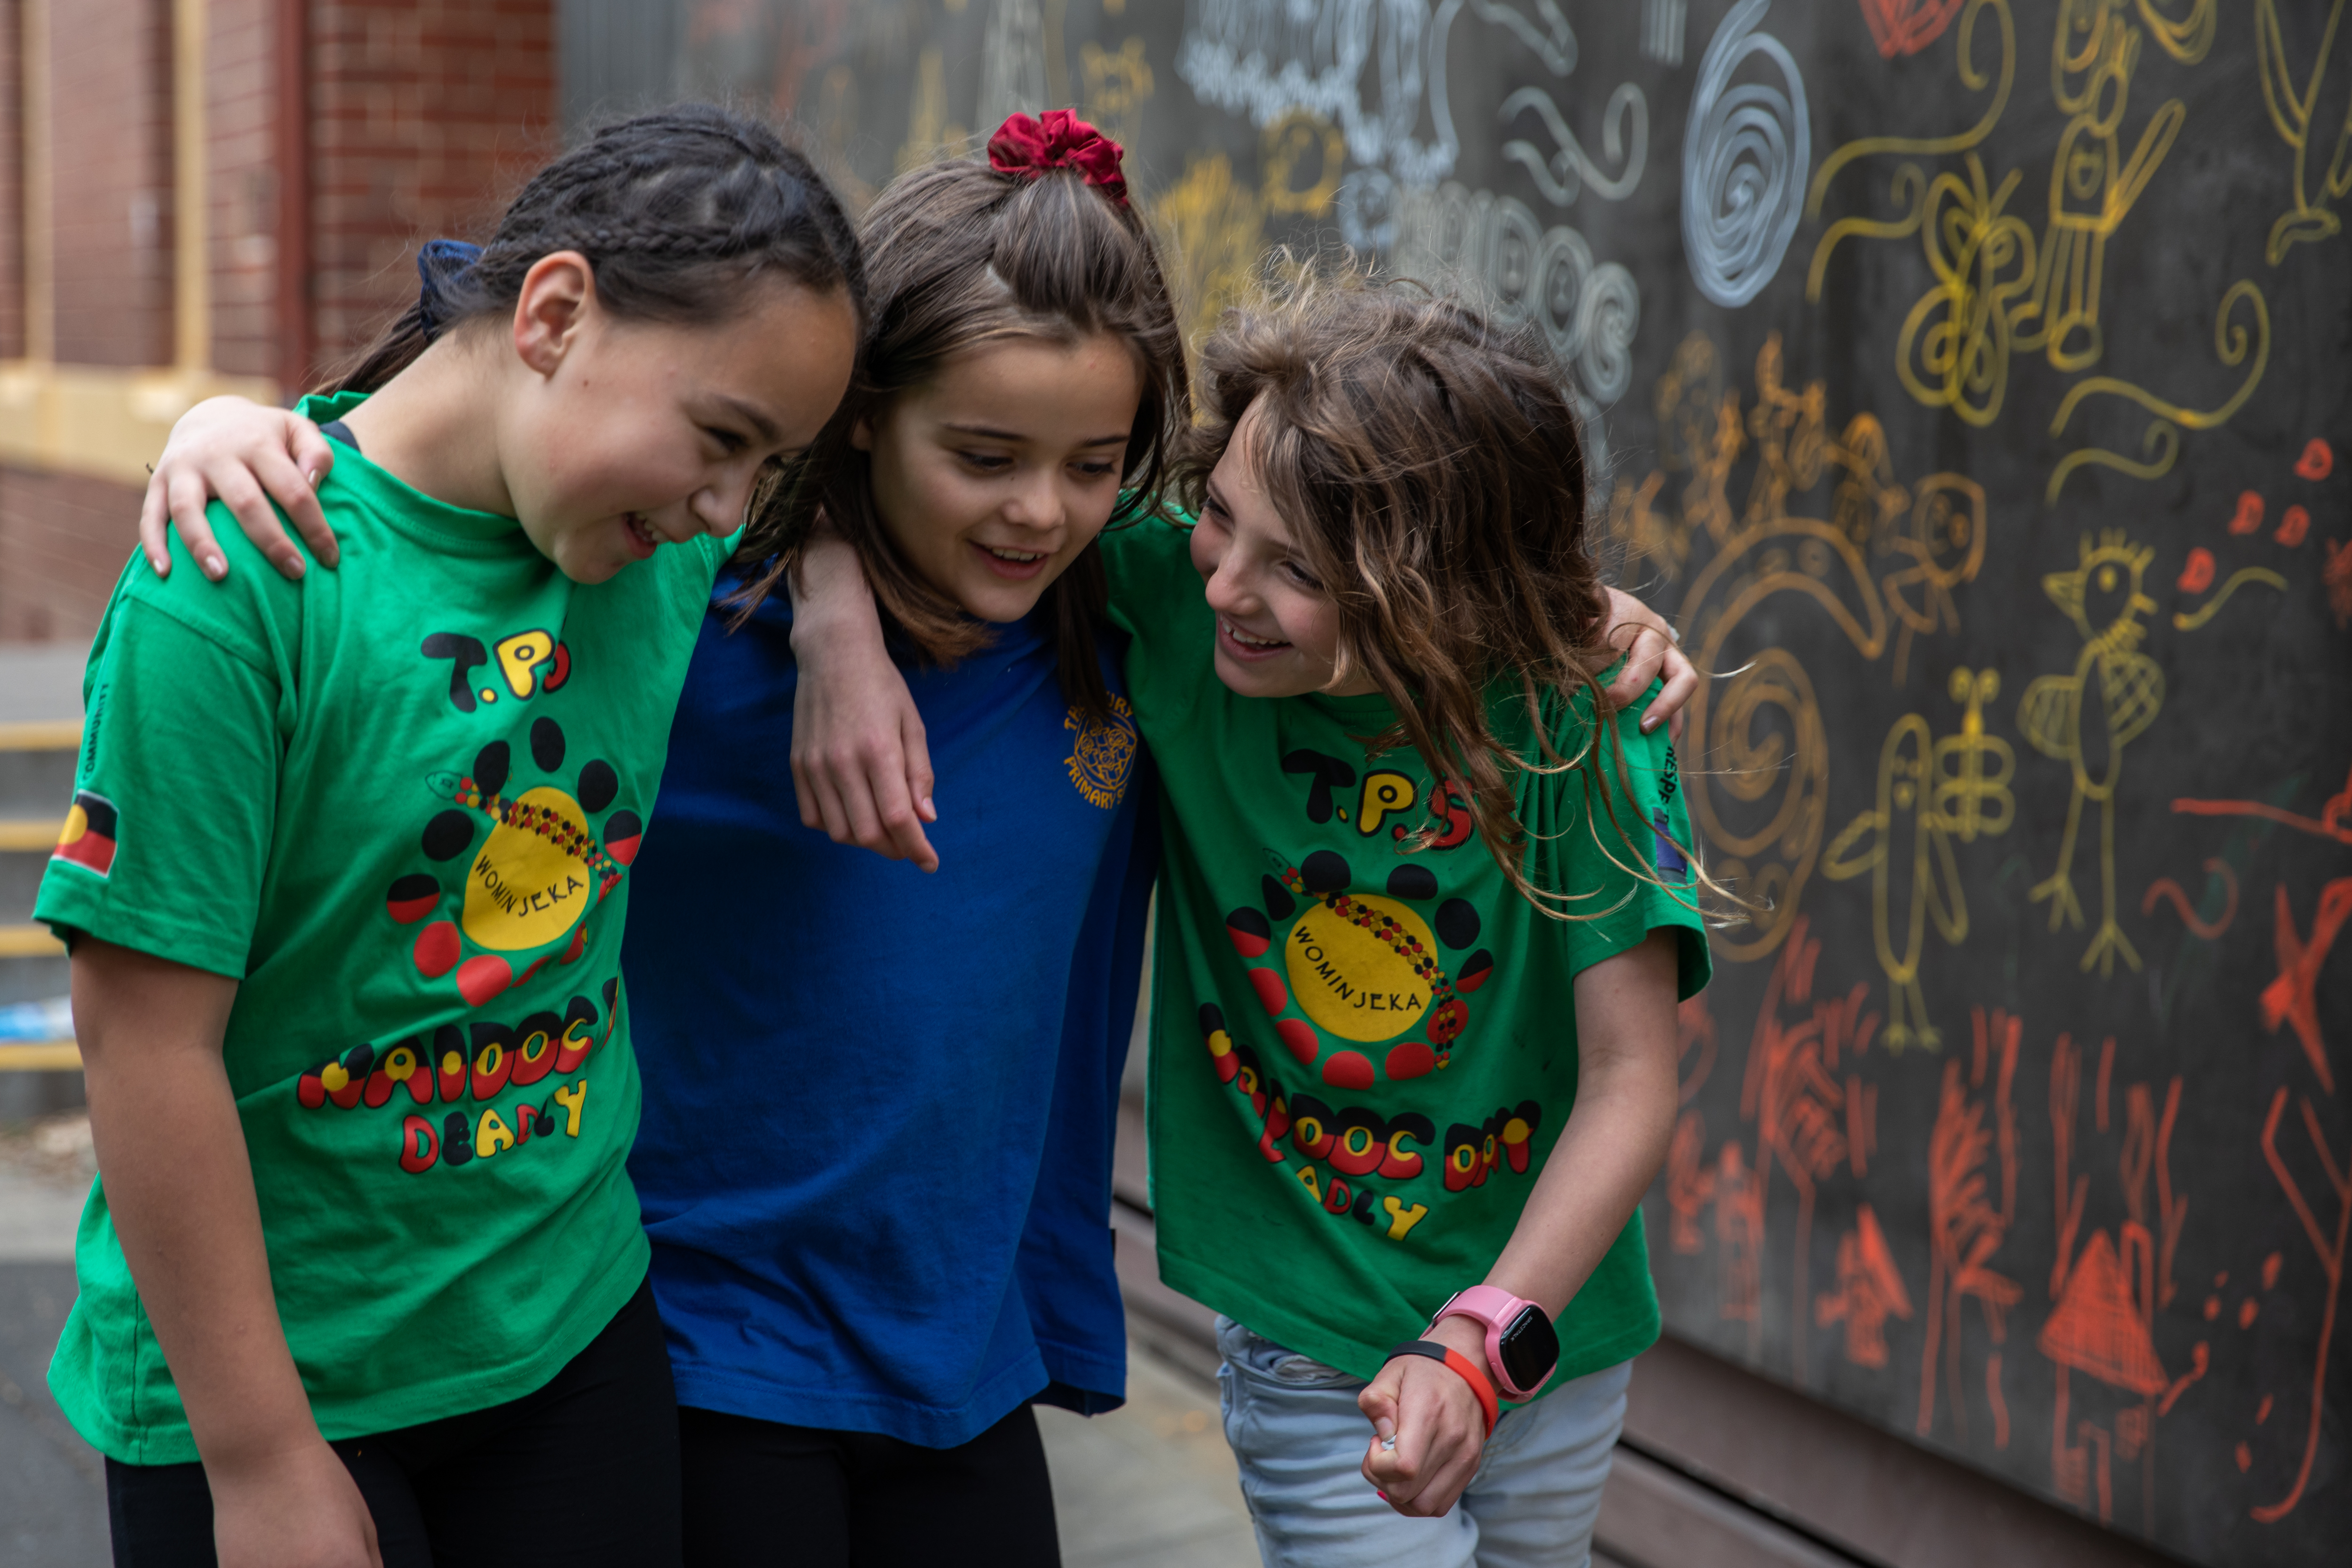 Three primary school aged students walking together with their arms around each other's shoulders. A colourful chalk art wall is in the background.